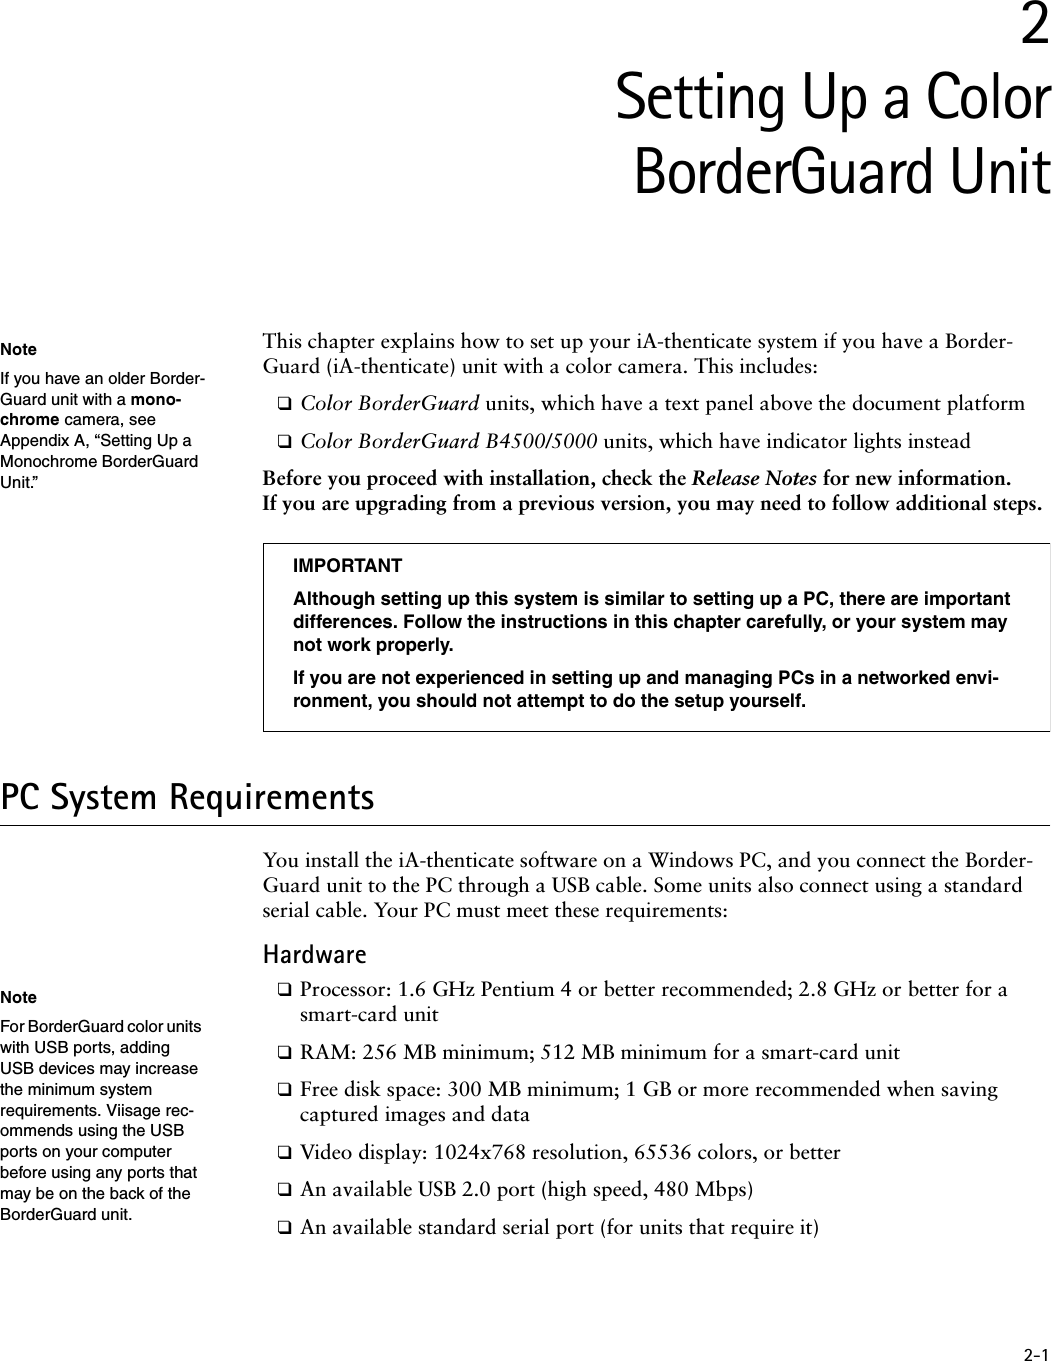 2-12Setting Up a ColorBorderGuard UnitThis chapter explains how to set up your iA-thenticate system if you have a Border-Guard (iA-thenticate) unit with a color camera. This includes:❑Color BorderGuard units, which have a text panel above the document platform❑Color BorderGuard B4500/5000 units, which have indicator lights insteadBefore you proceed with installation, check the Release Notes for new information. If you are upgrading from a previous version, you may need to follow additional steps.PC System RequirementsYou install the iA-thenticate software on a Windows PC, and you connect the Border-Guard unit to the PC through a USB cable. Some units also connect using a standard serial cable. Your PC must meet these requirements:Hardware❑Processor: 1.6 GHz Pentium 4 or better recommended; 2.8 GHz or better for a smart-card unit❑RAM: 256 MB minimum; 512 MB minimum for a smart-card unit❑Free disk space: 300 MB minimum; 1 GB or more recommended when saving captured images and data❑Video display: 1024x768 resolution, 65536 colors, or better❑An available USB 2.0 port (high speed, 480 Mbps)❑An available standard serial port (for units that require it)NoteIf you have an older Border-Guard unit with a mono-chrome camera, see Appendix A, “Setting Up a Monochrome BorderGuard Unit.”IMPORTANTAlthough setting up this system is similar to setting up a PC, there are important differences. Follow the instructions in this chapter carefully, or your system may not work properly.If you are not experienced in setting up and managing PCs in a networked envi-ronment, you should not attempt to do the setup yourself.NoteFor BorderGuard color units with USB ports, adding USB devices may increase the minimum system requirements. Viisage rec-ommends using the USB ports on your computer before using any ports that may be on the back of the BorderGuard unit.